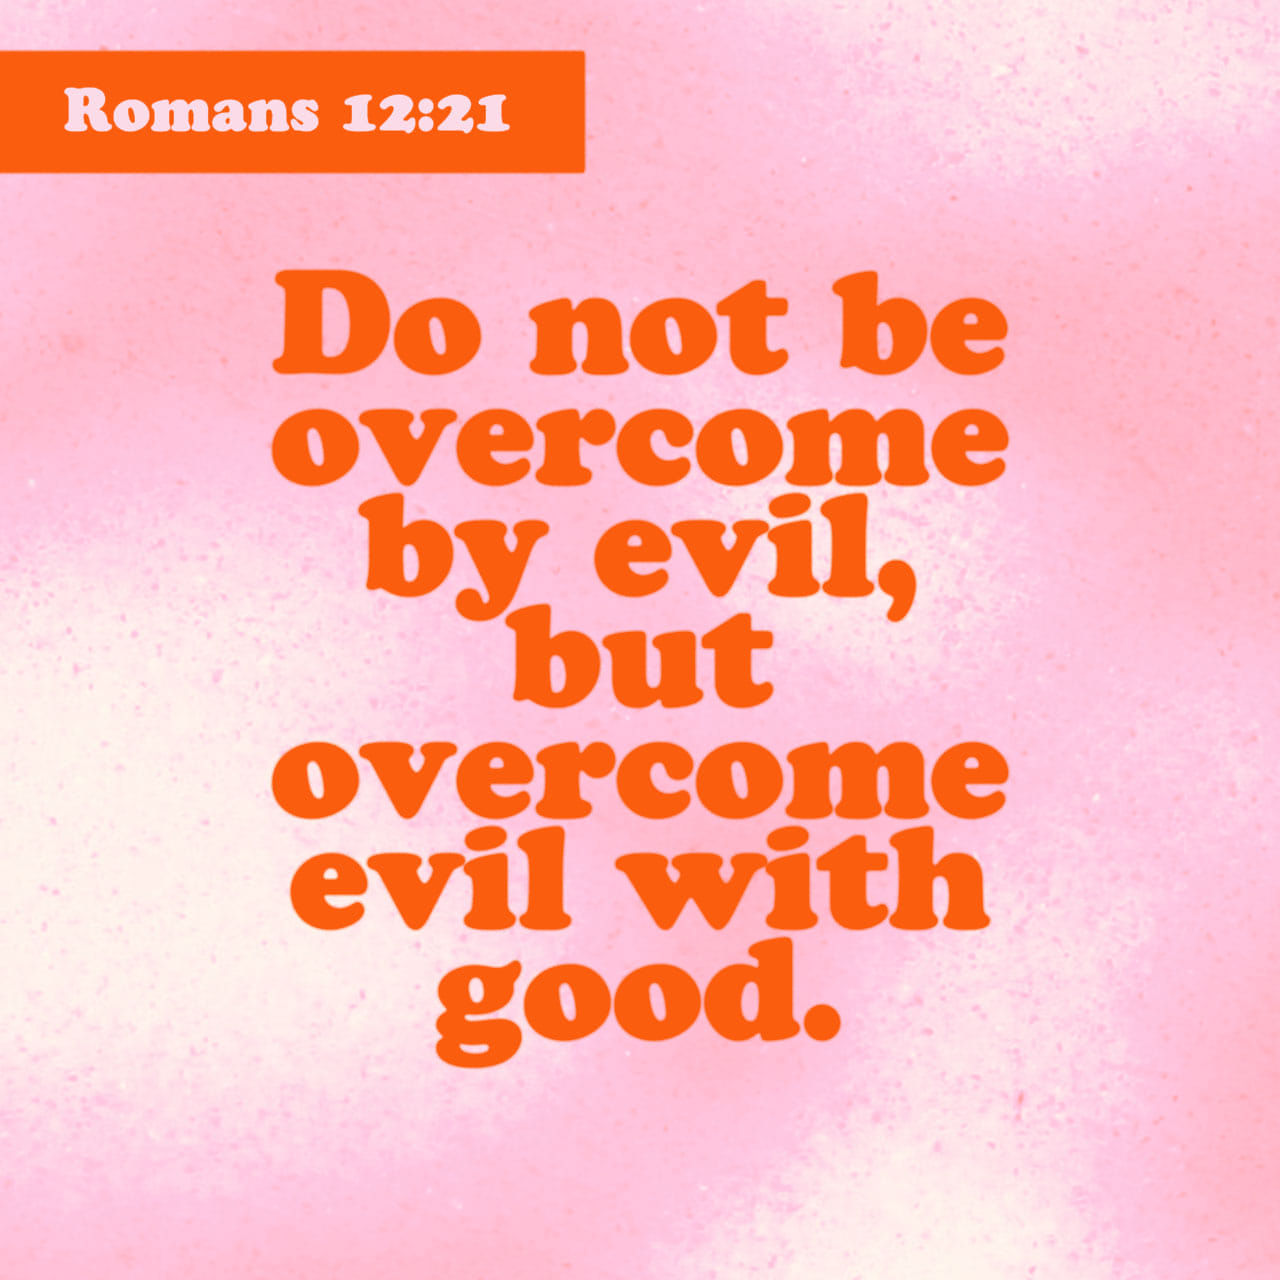 Romans 12:9-21 Let love be without hypocrisy. Abhor what is evil. Cling to what is good. Be kindly affectionate to one another with brotherly love, in honor giving preference to one another; not lagging in diligence | New King James Version (NKJV) | Downl